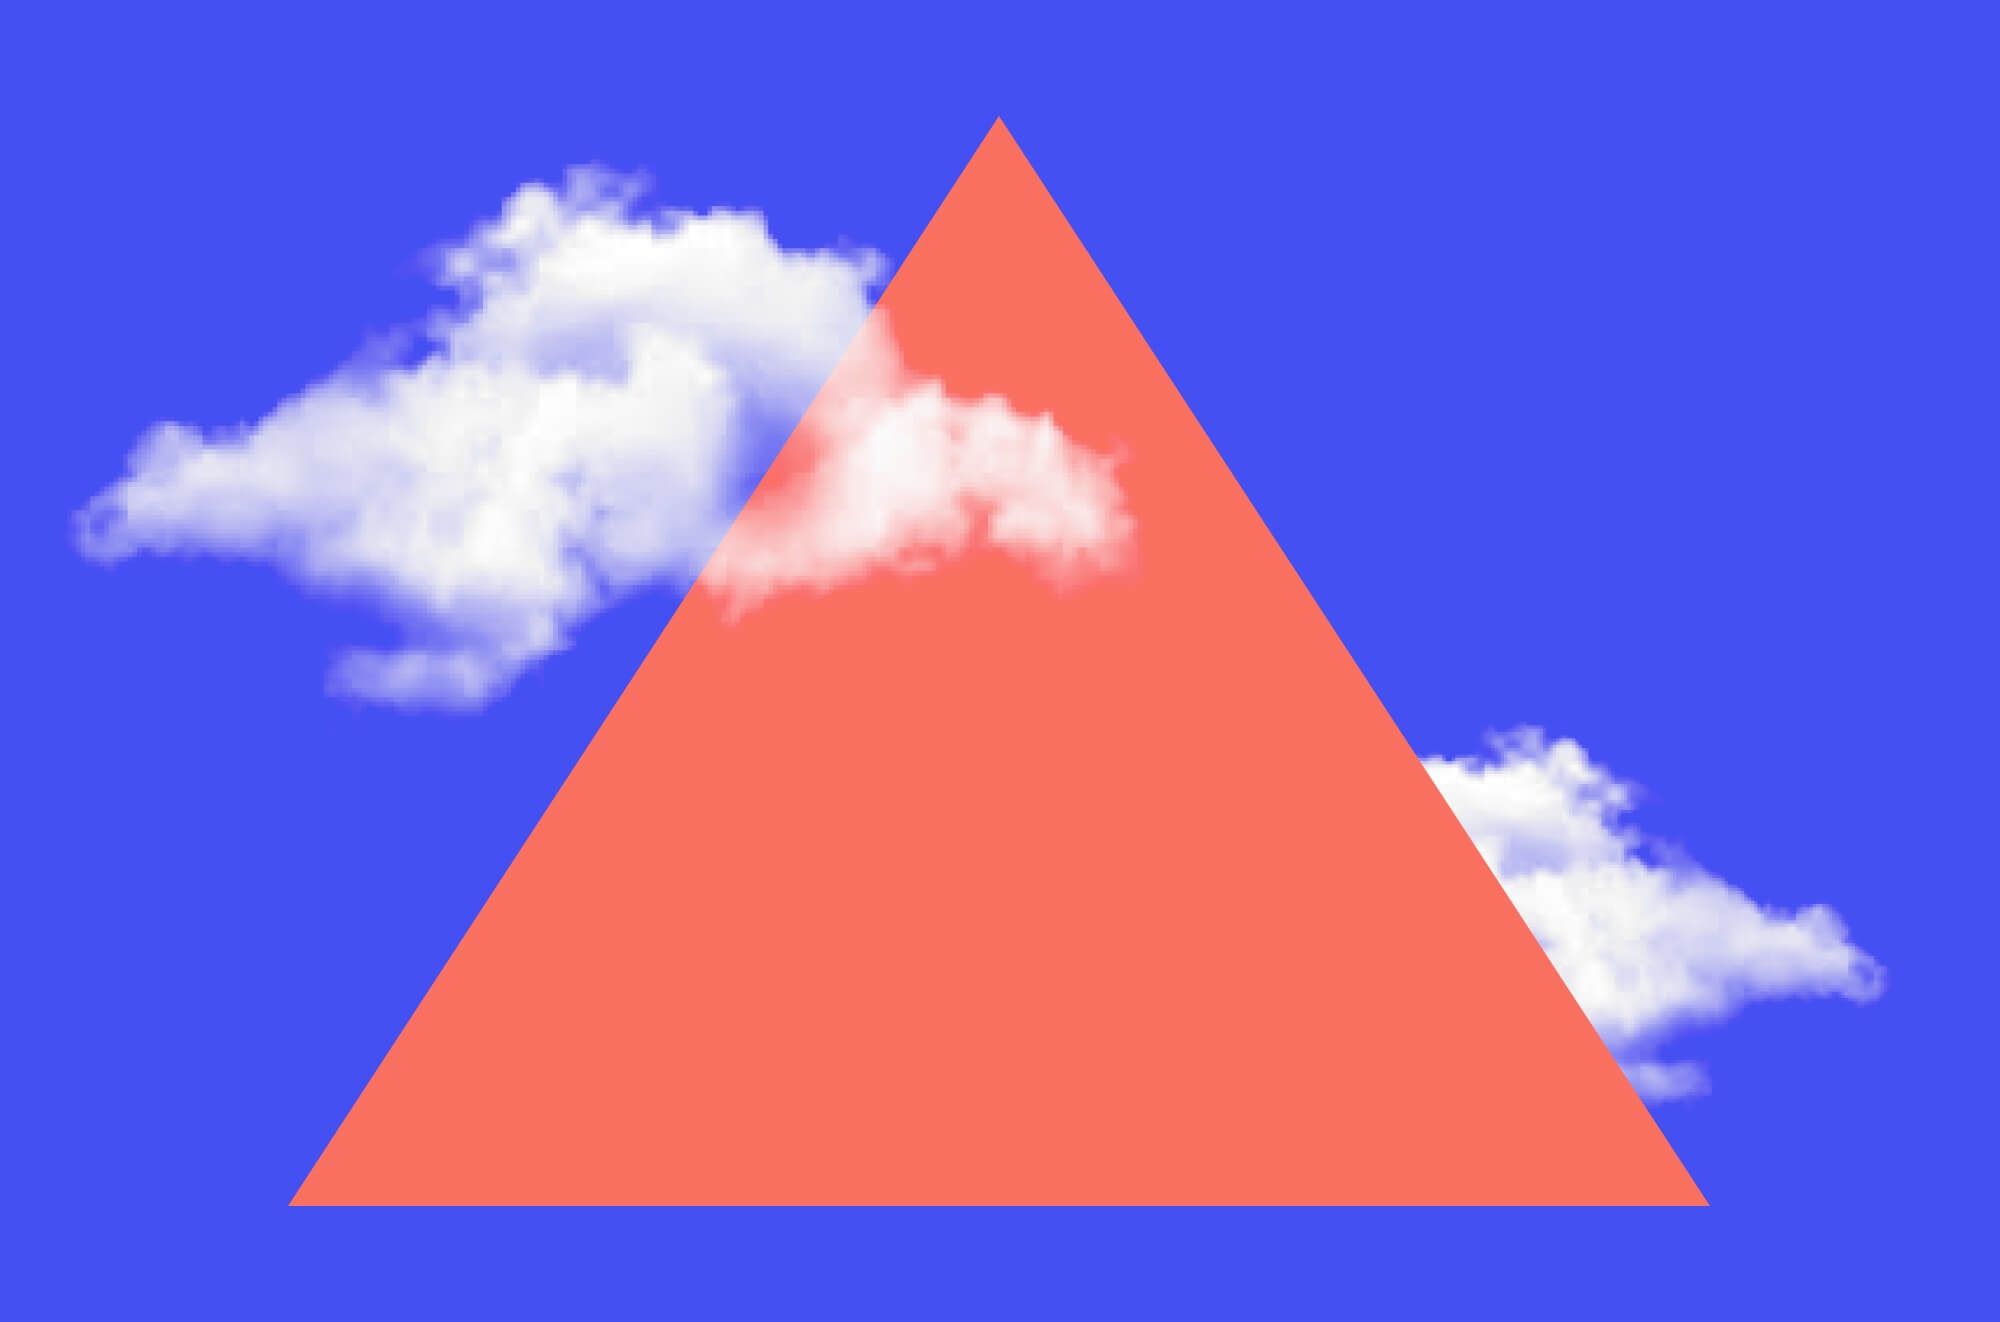 A coral triangle enveloped in clouds shown on a blue background.